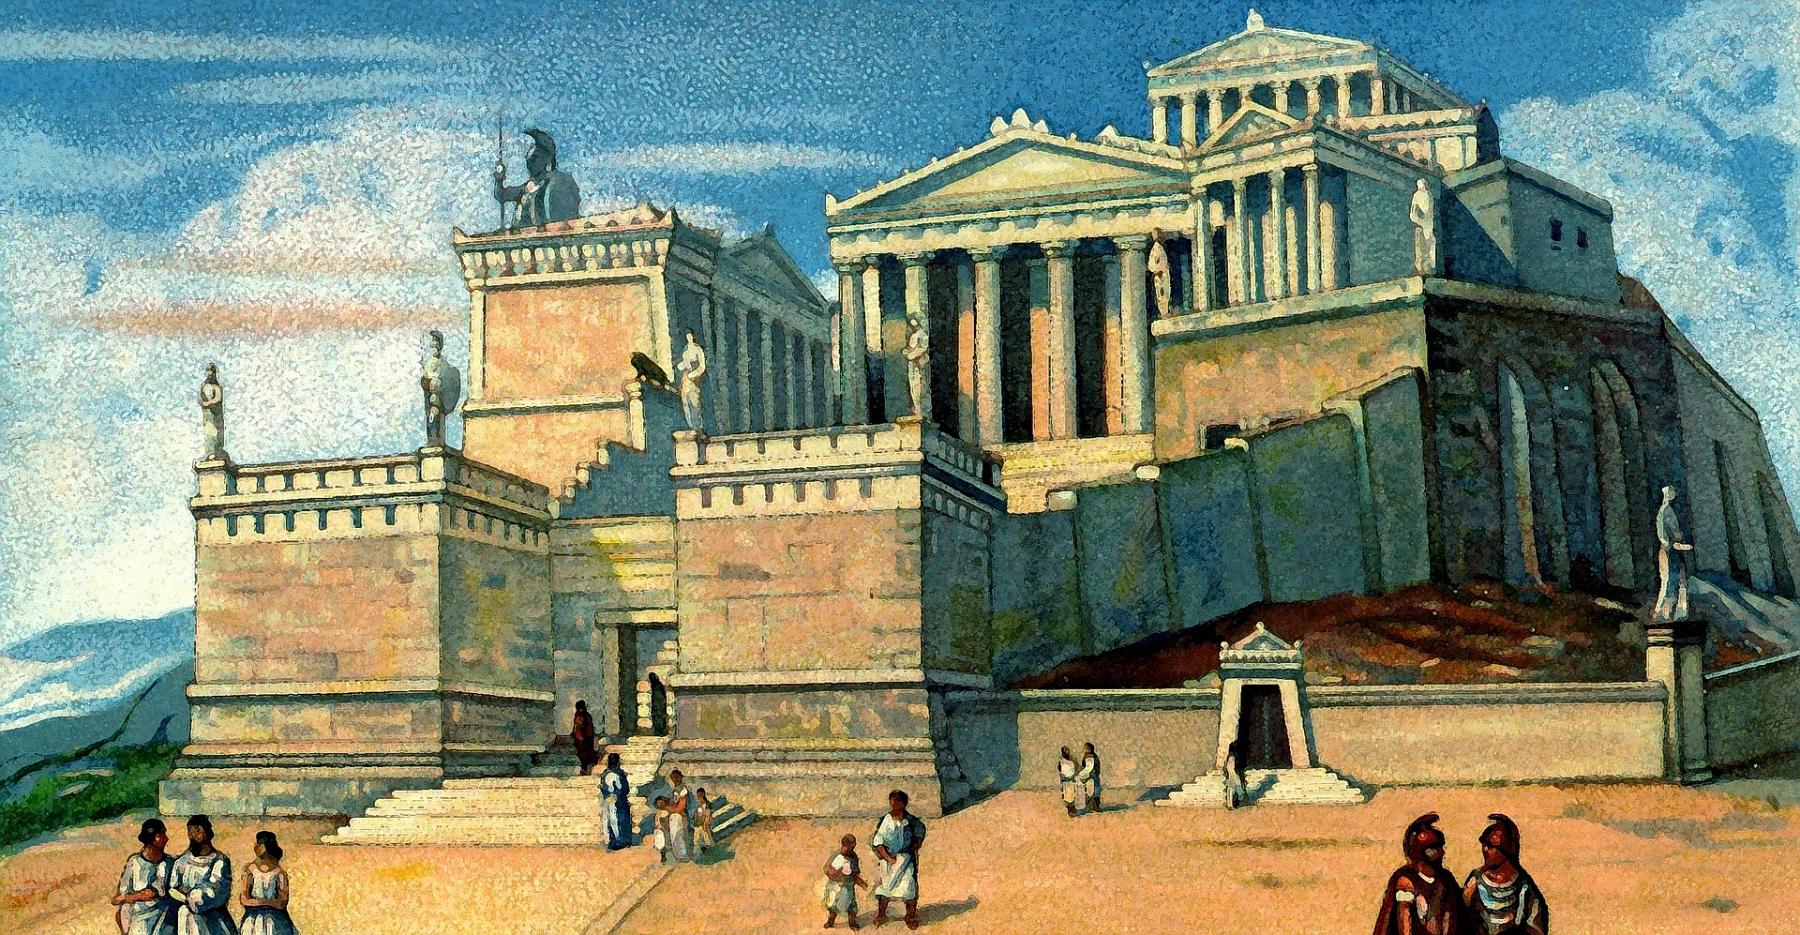 Athens, a city full of history and myths: A dive into the rich past of the city